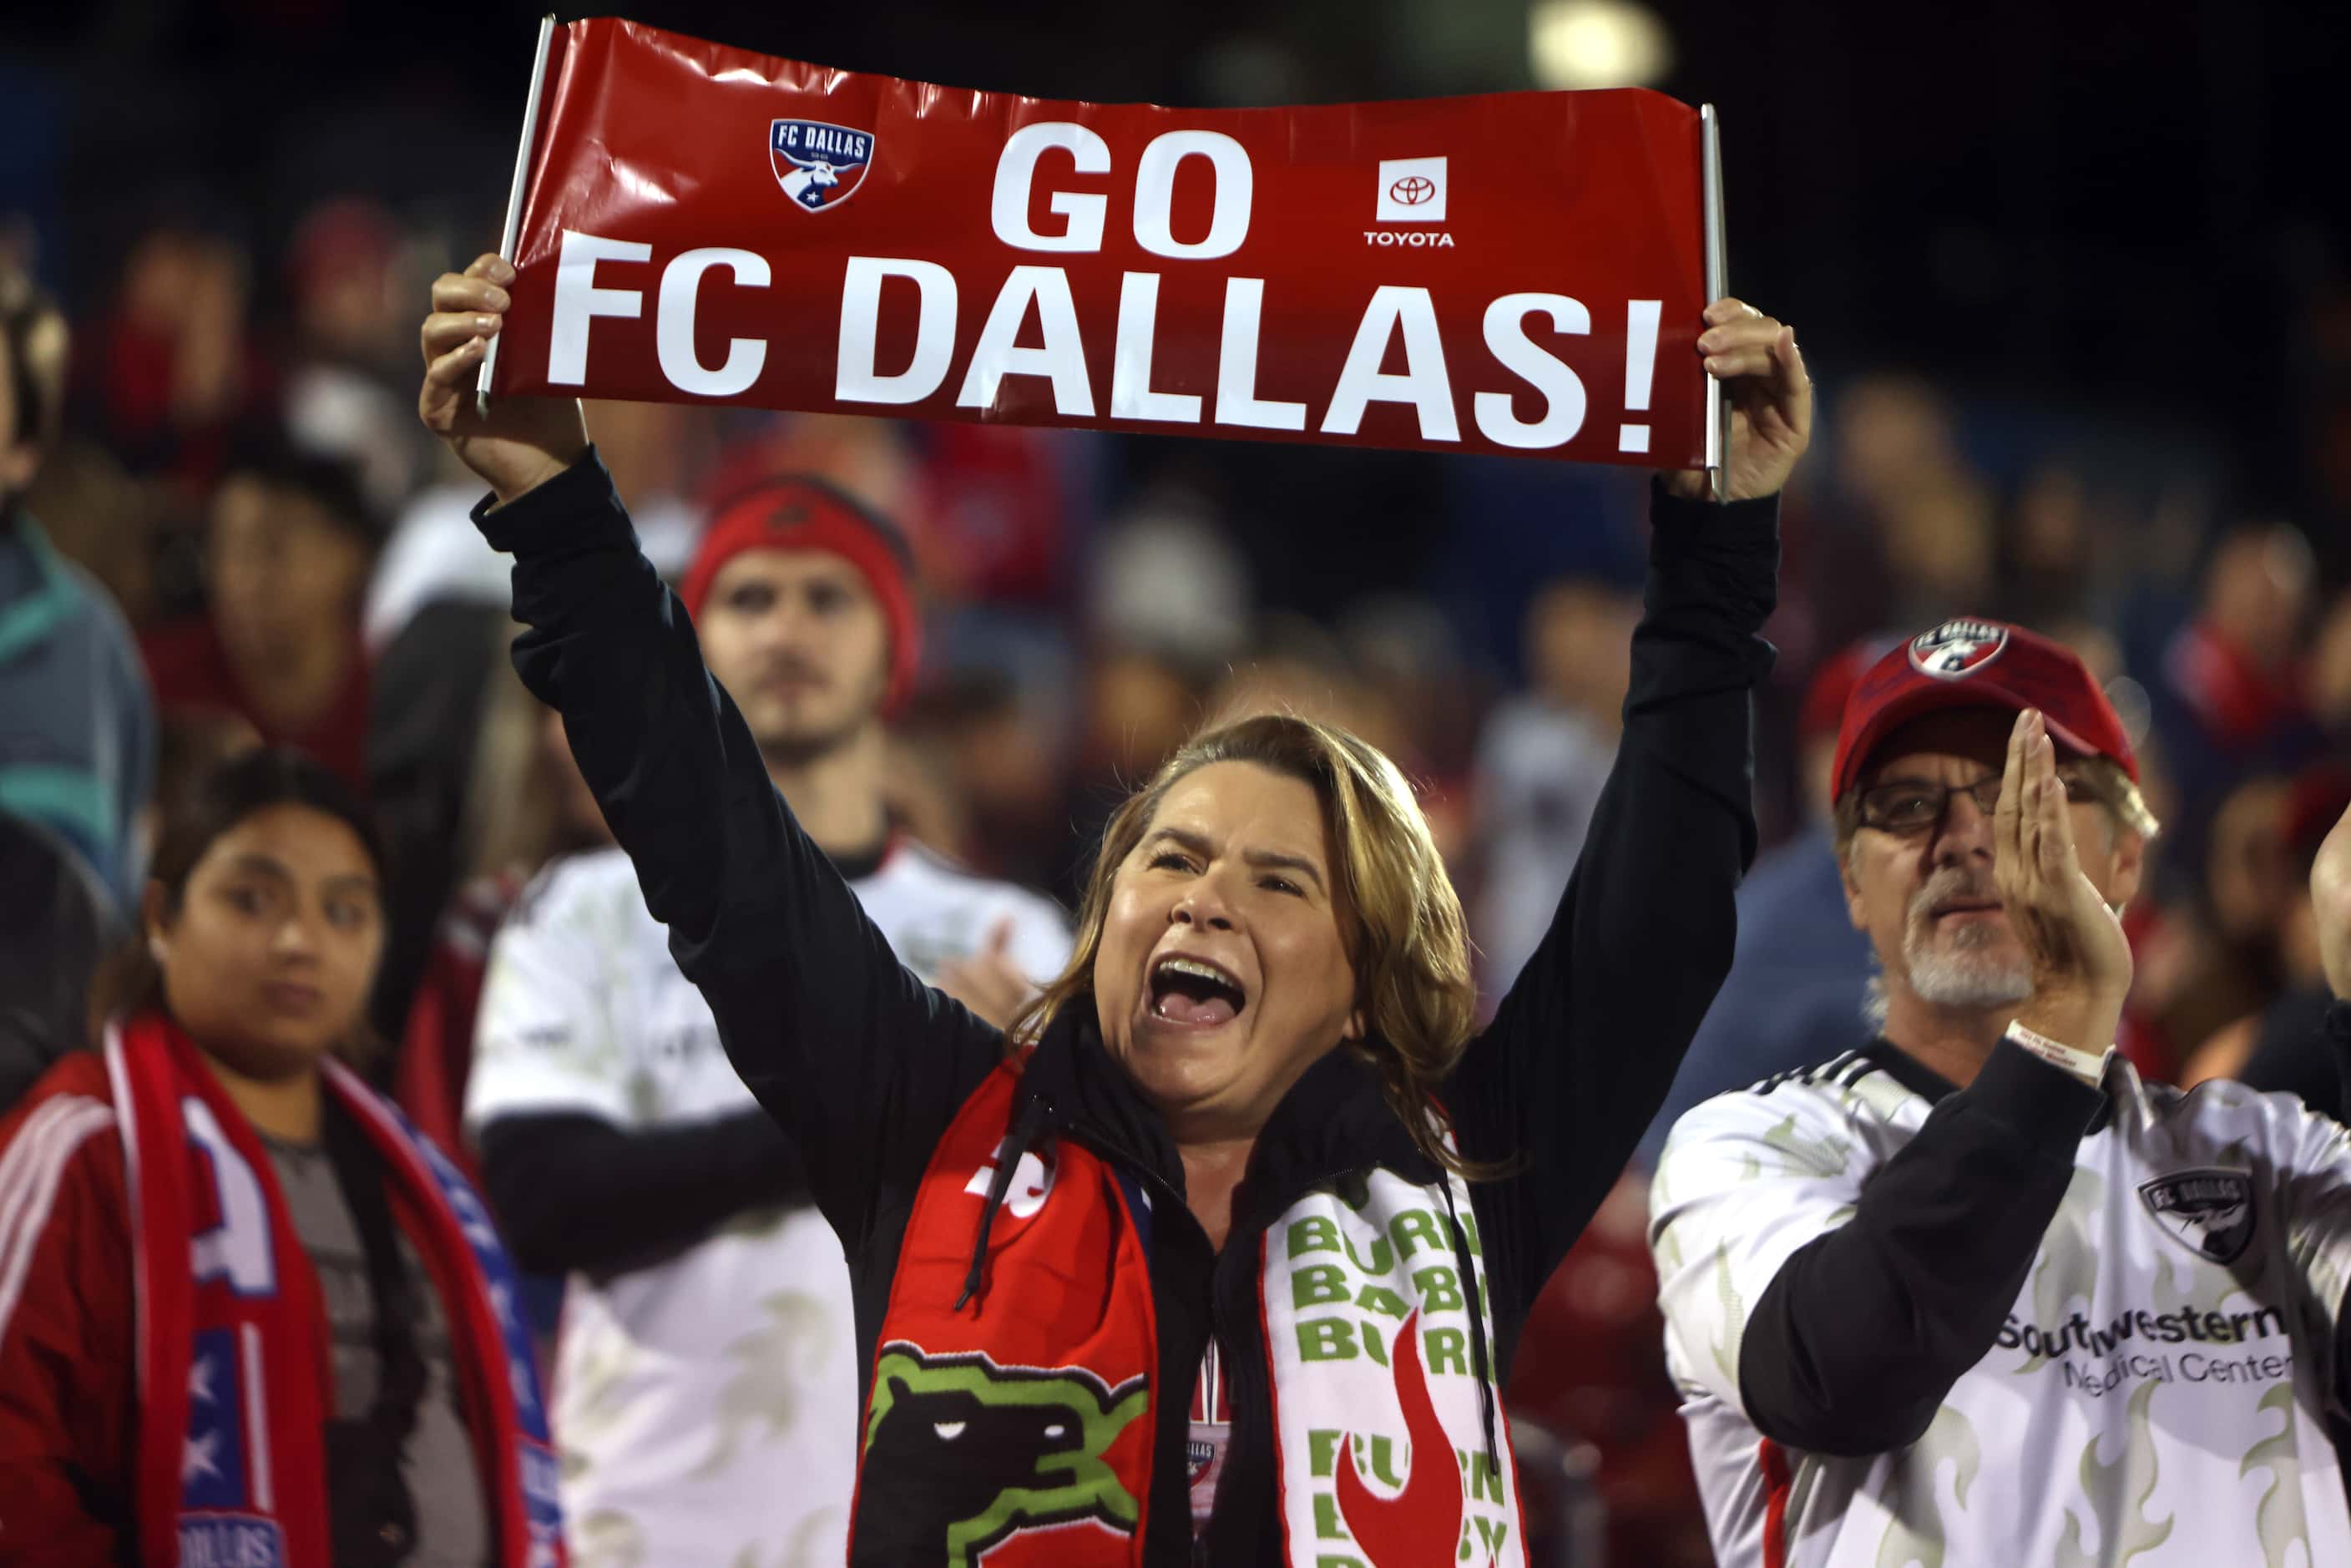 FC Dallas fans cheer as team members come out onto the field prior to the start of their...